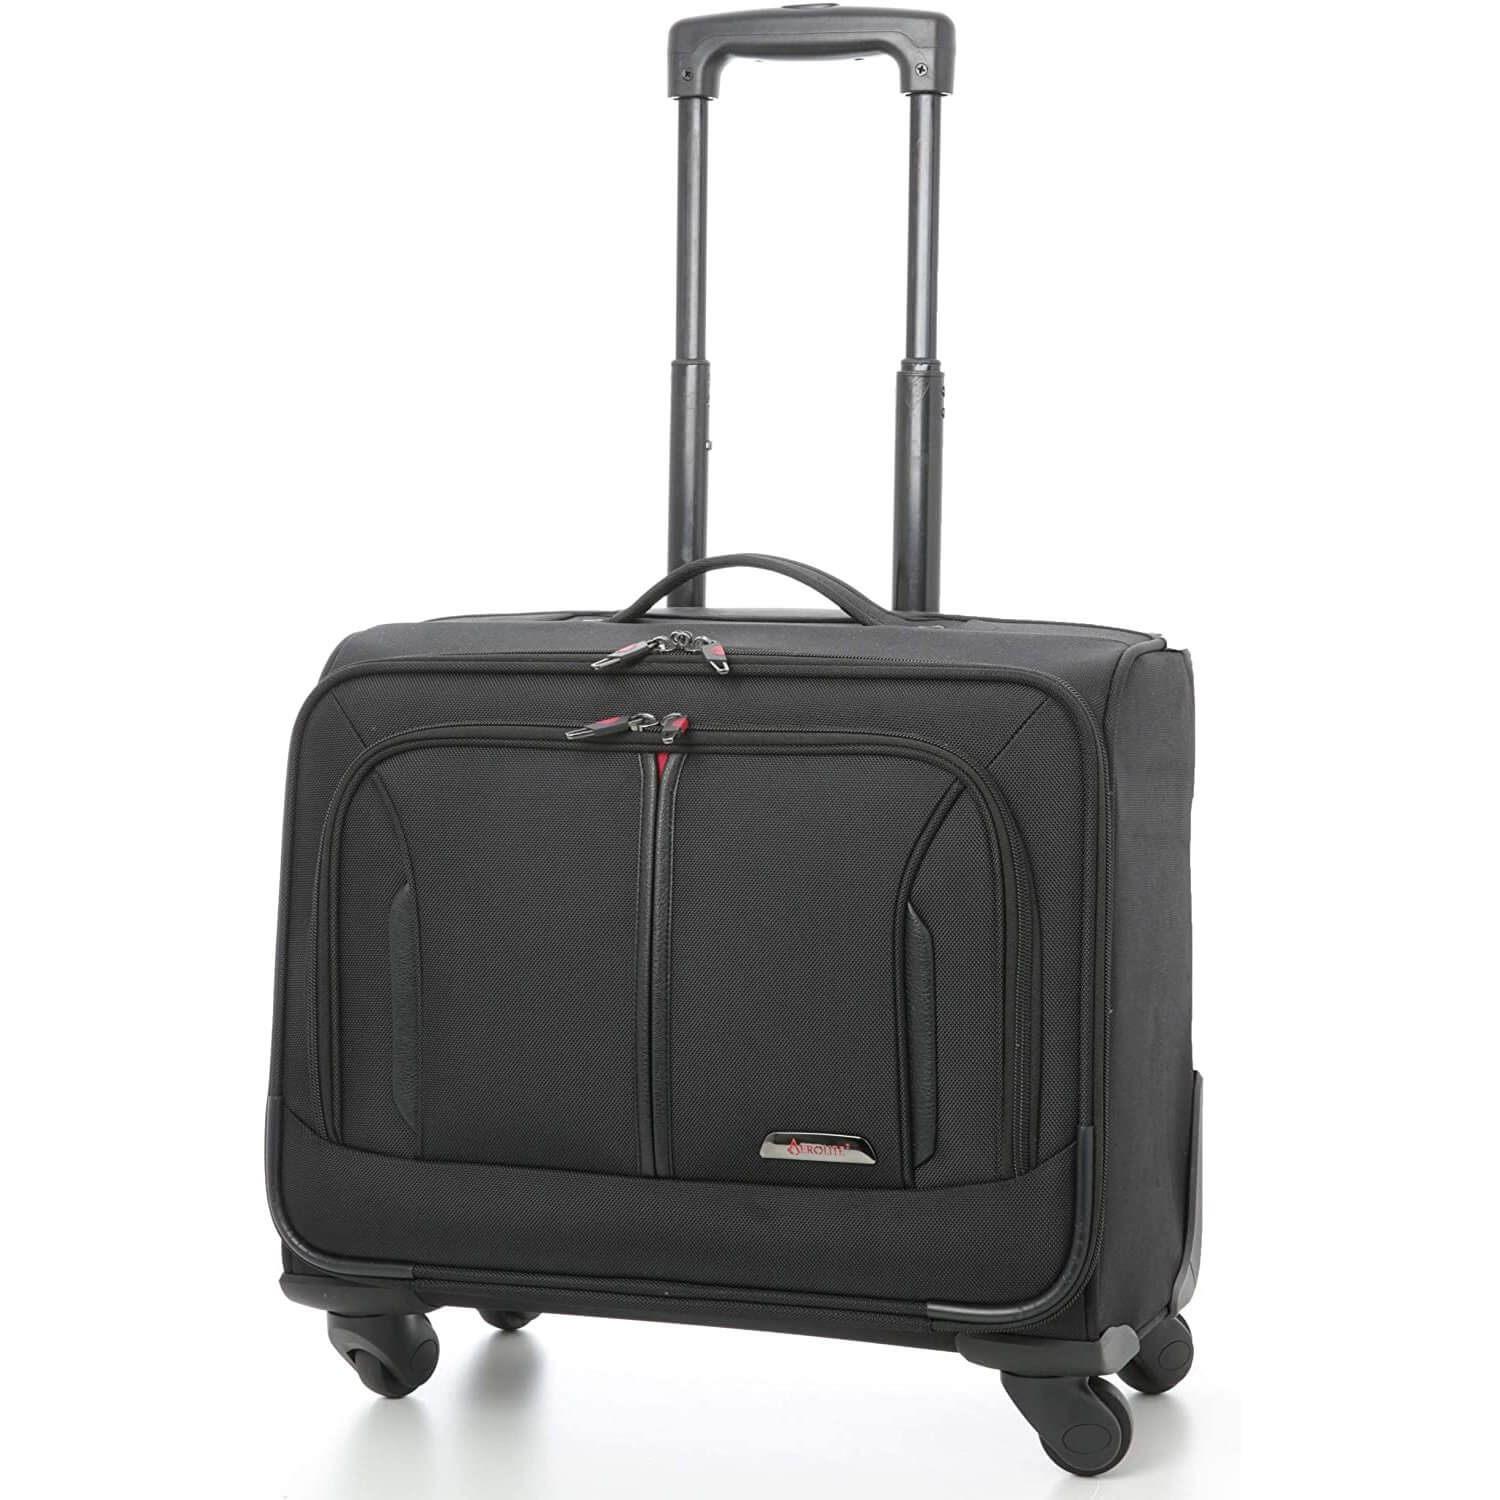 Aerolite Rolling Padded Laptop Case With 4 Wheels - Fits up to 15.6", Overnight Trolley Business Hand Cabin Luggage Case easyJet Plus/Flexi/Up Front/Extra Legroom, British Airways & Jet2 Approved Black